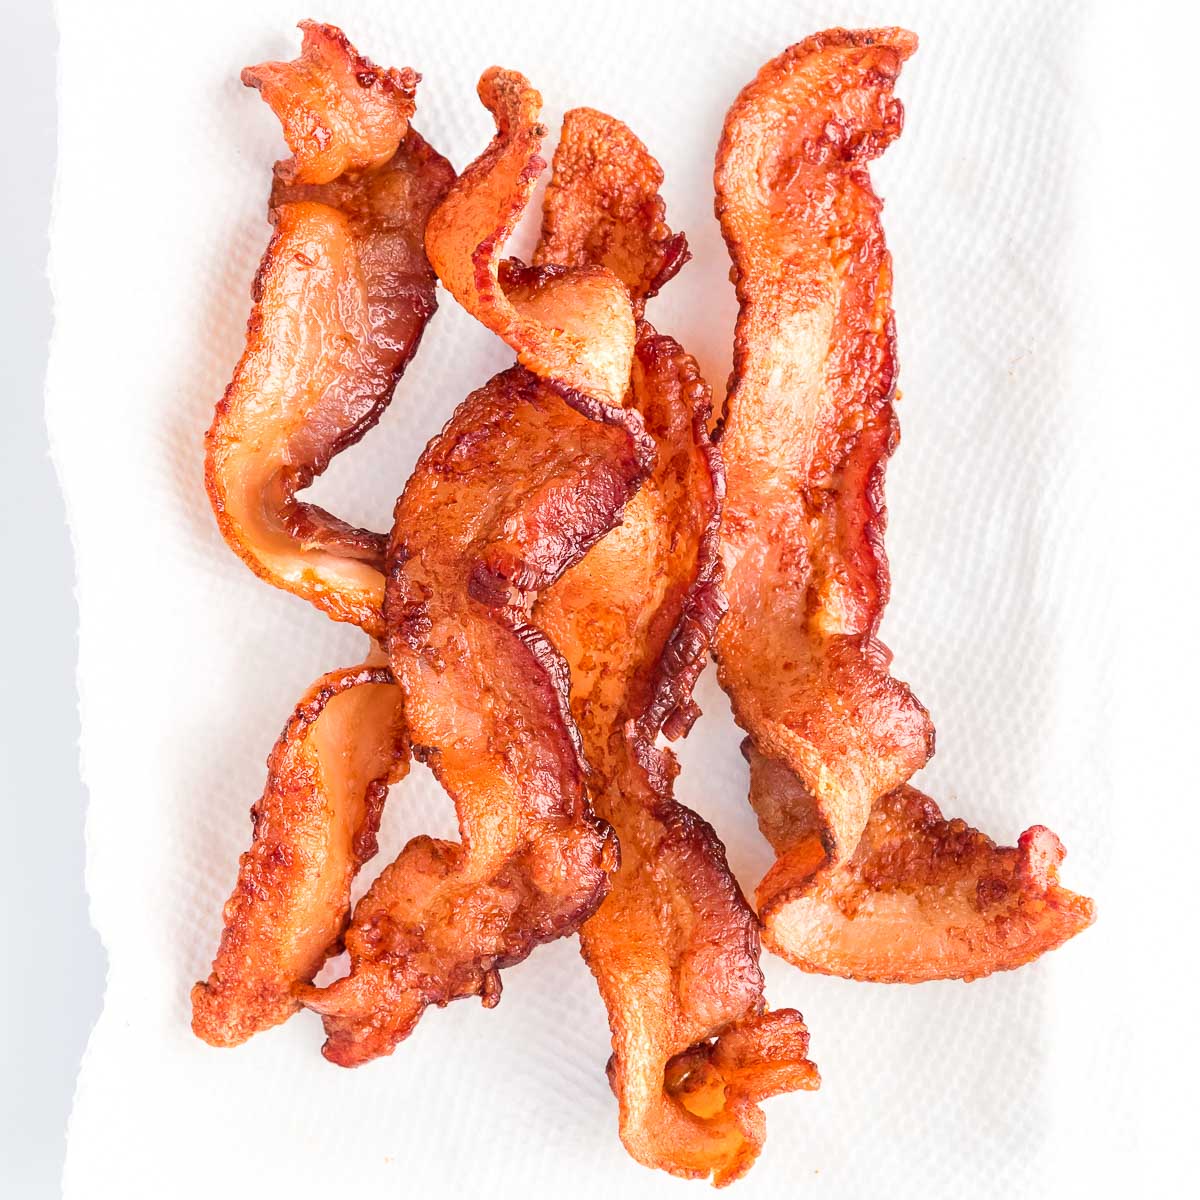 Air fryer bacon • We Count Carbs